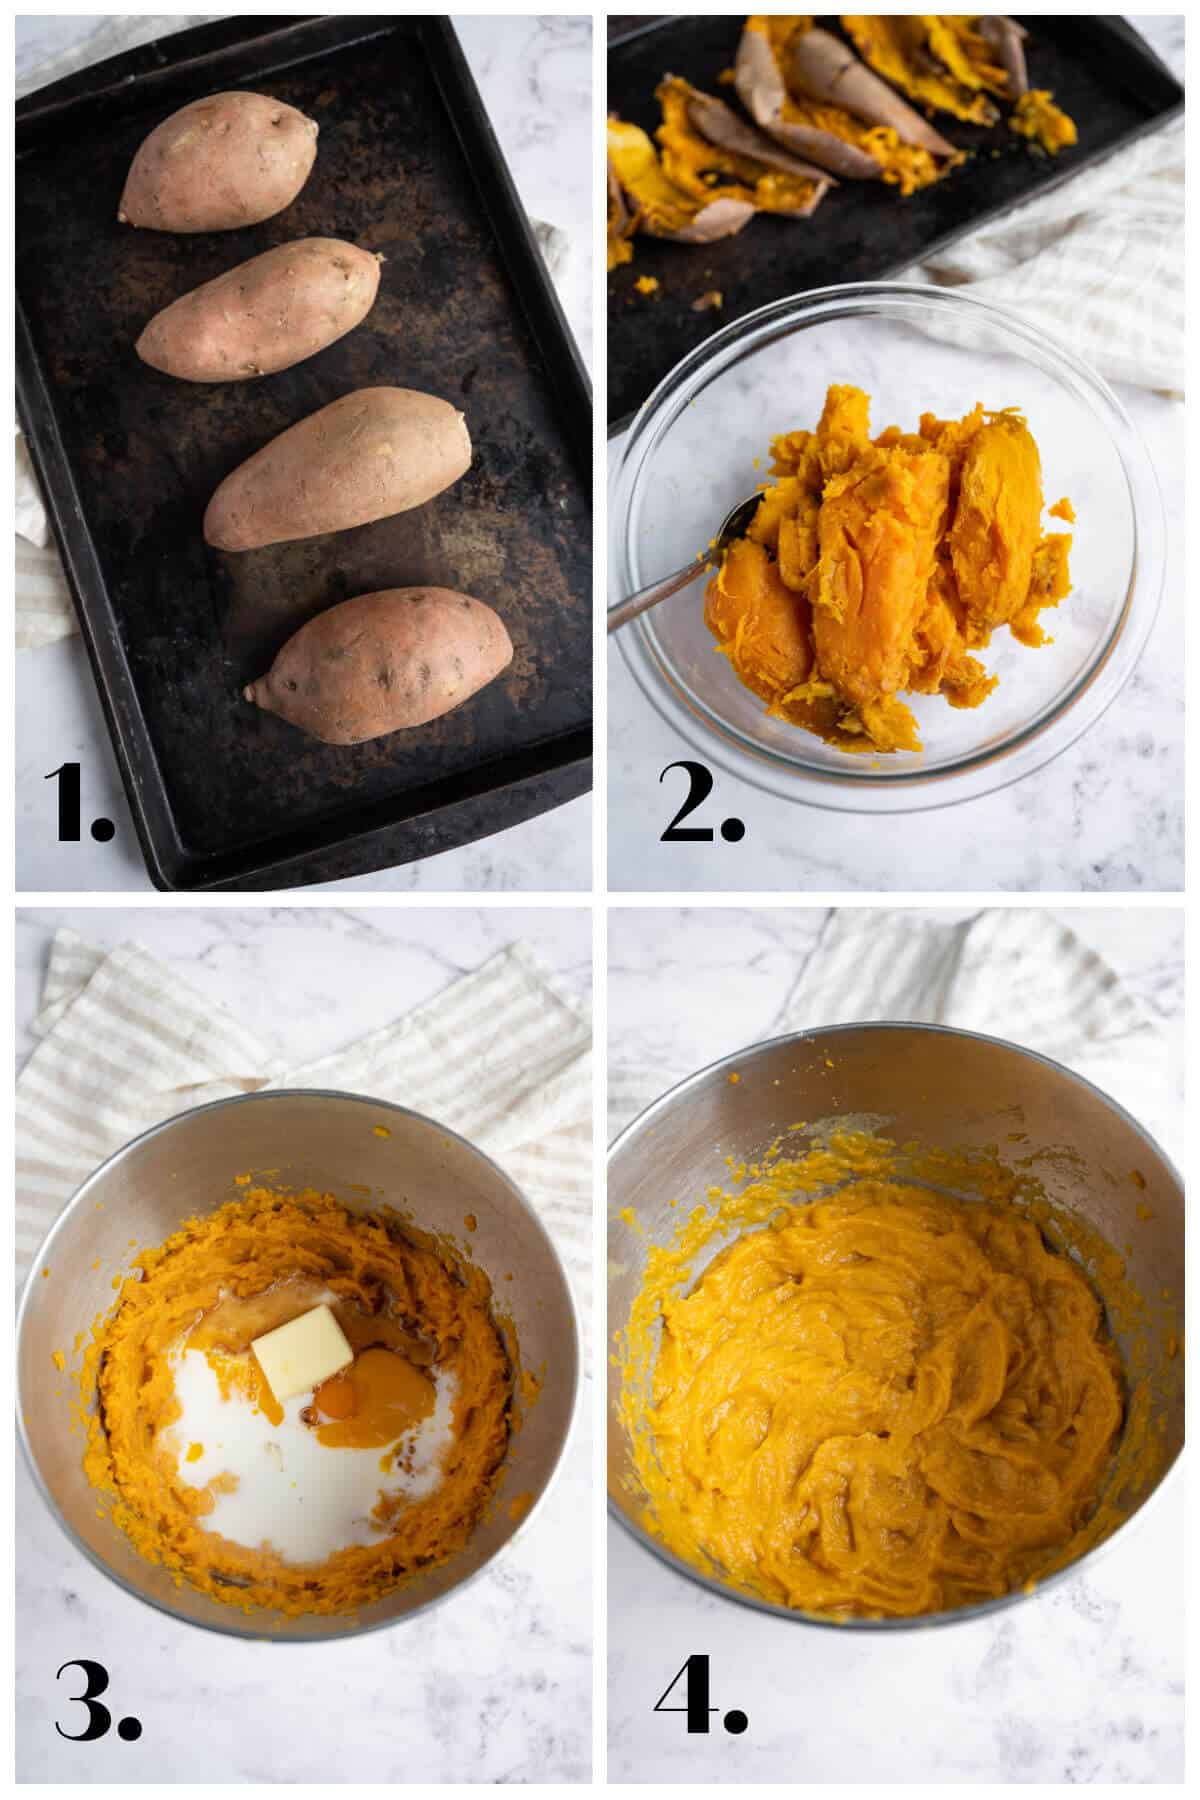 4-image collage showing how to make whipped sweet potato casserole.